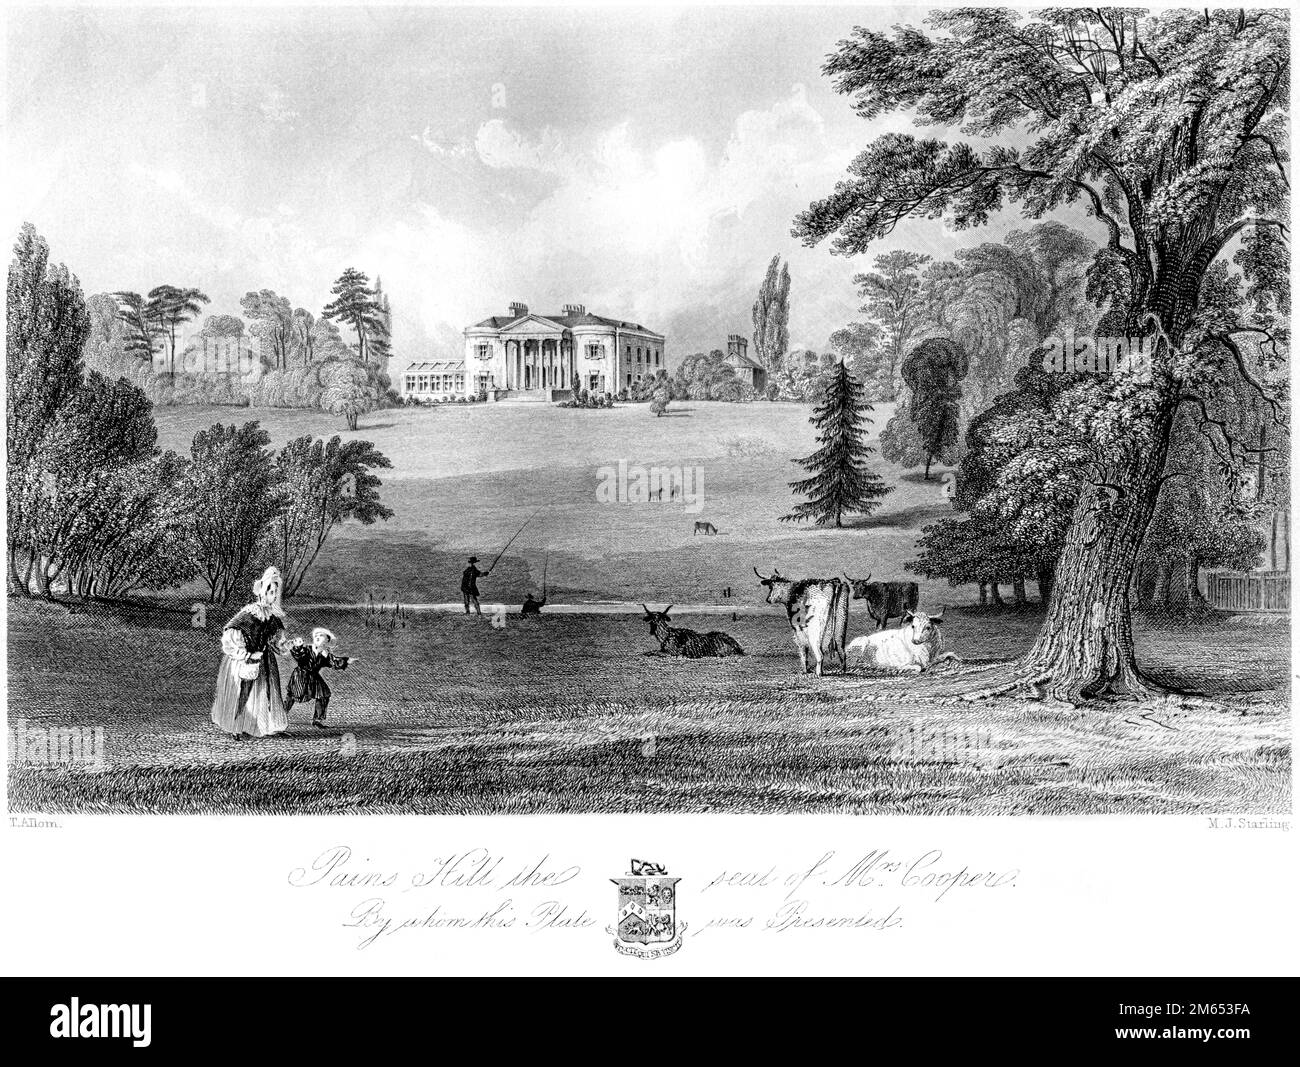 An engraving of Pains Hill the Seat of Mrs Cooper (Painshill), Surrey scanned at high resolution from a book printed in 1850. Believed copyright free. Stock Photo